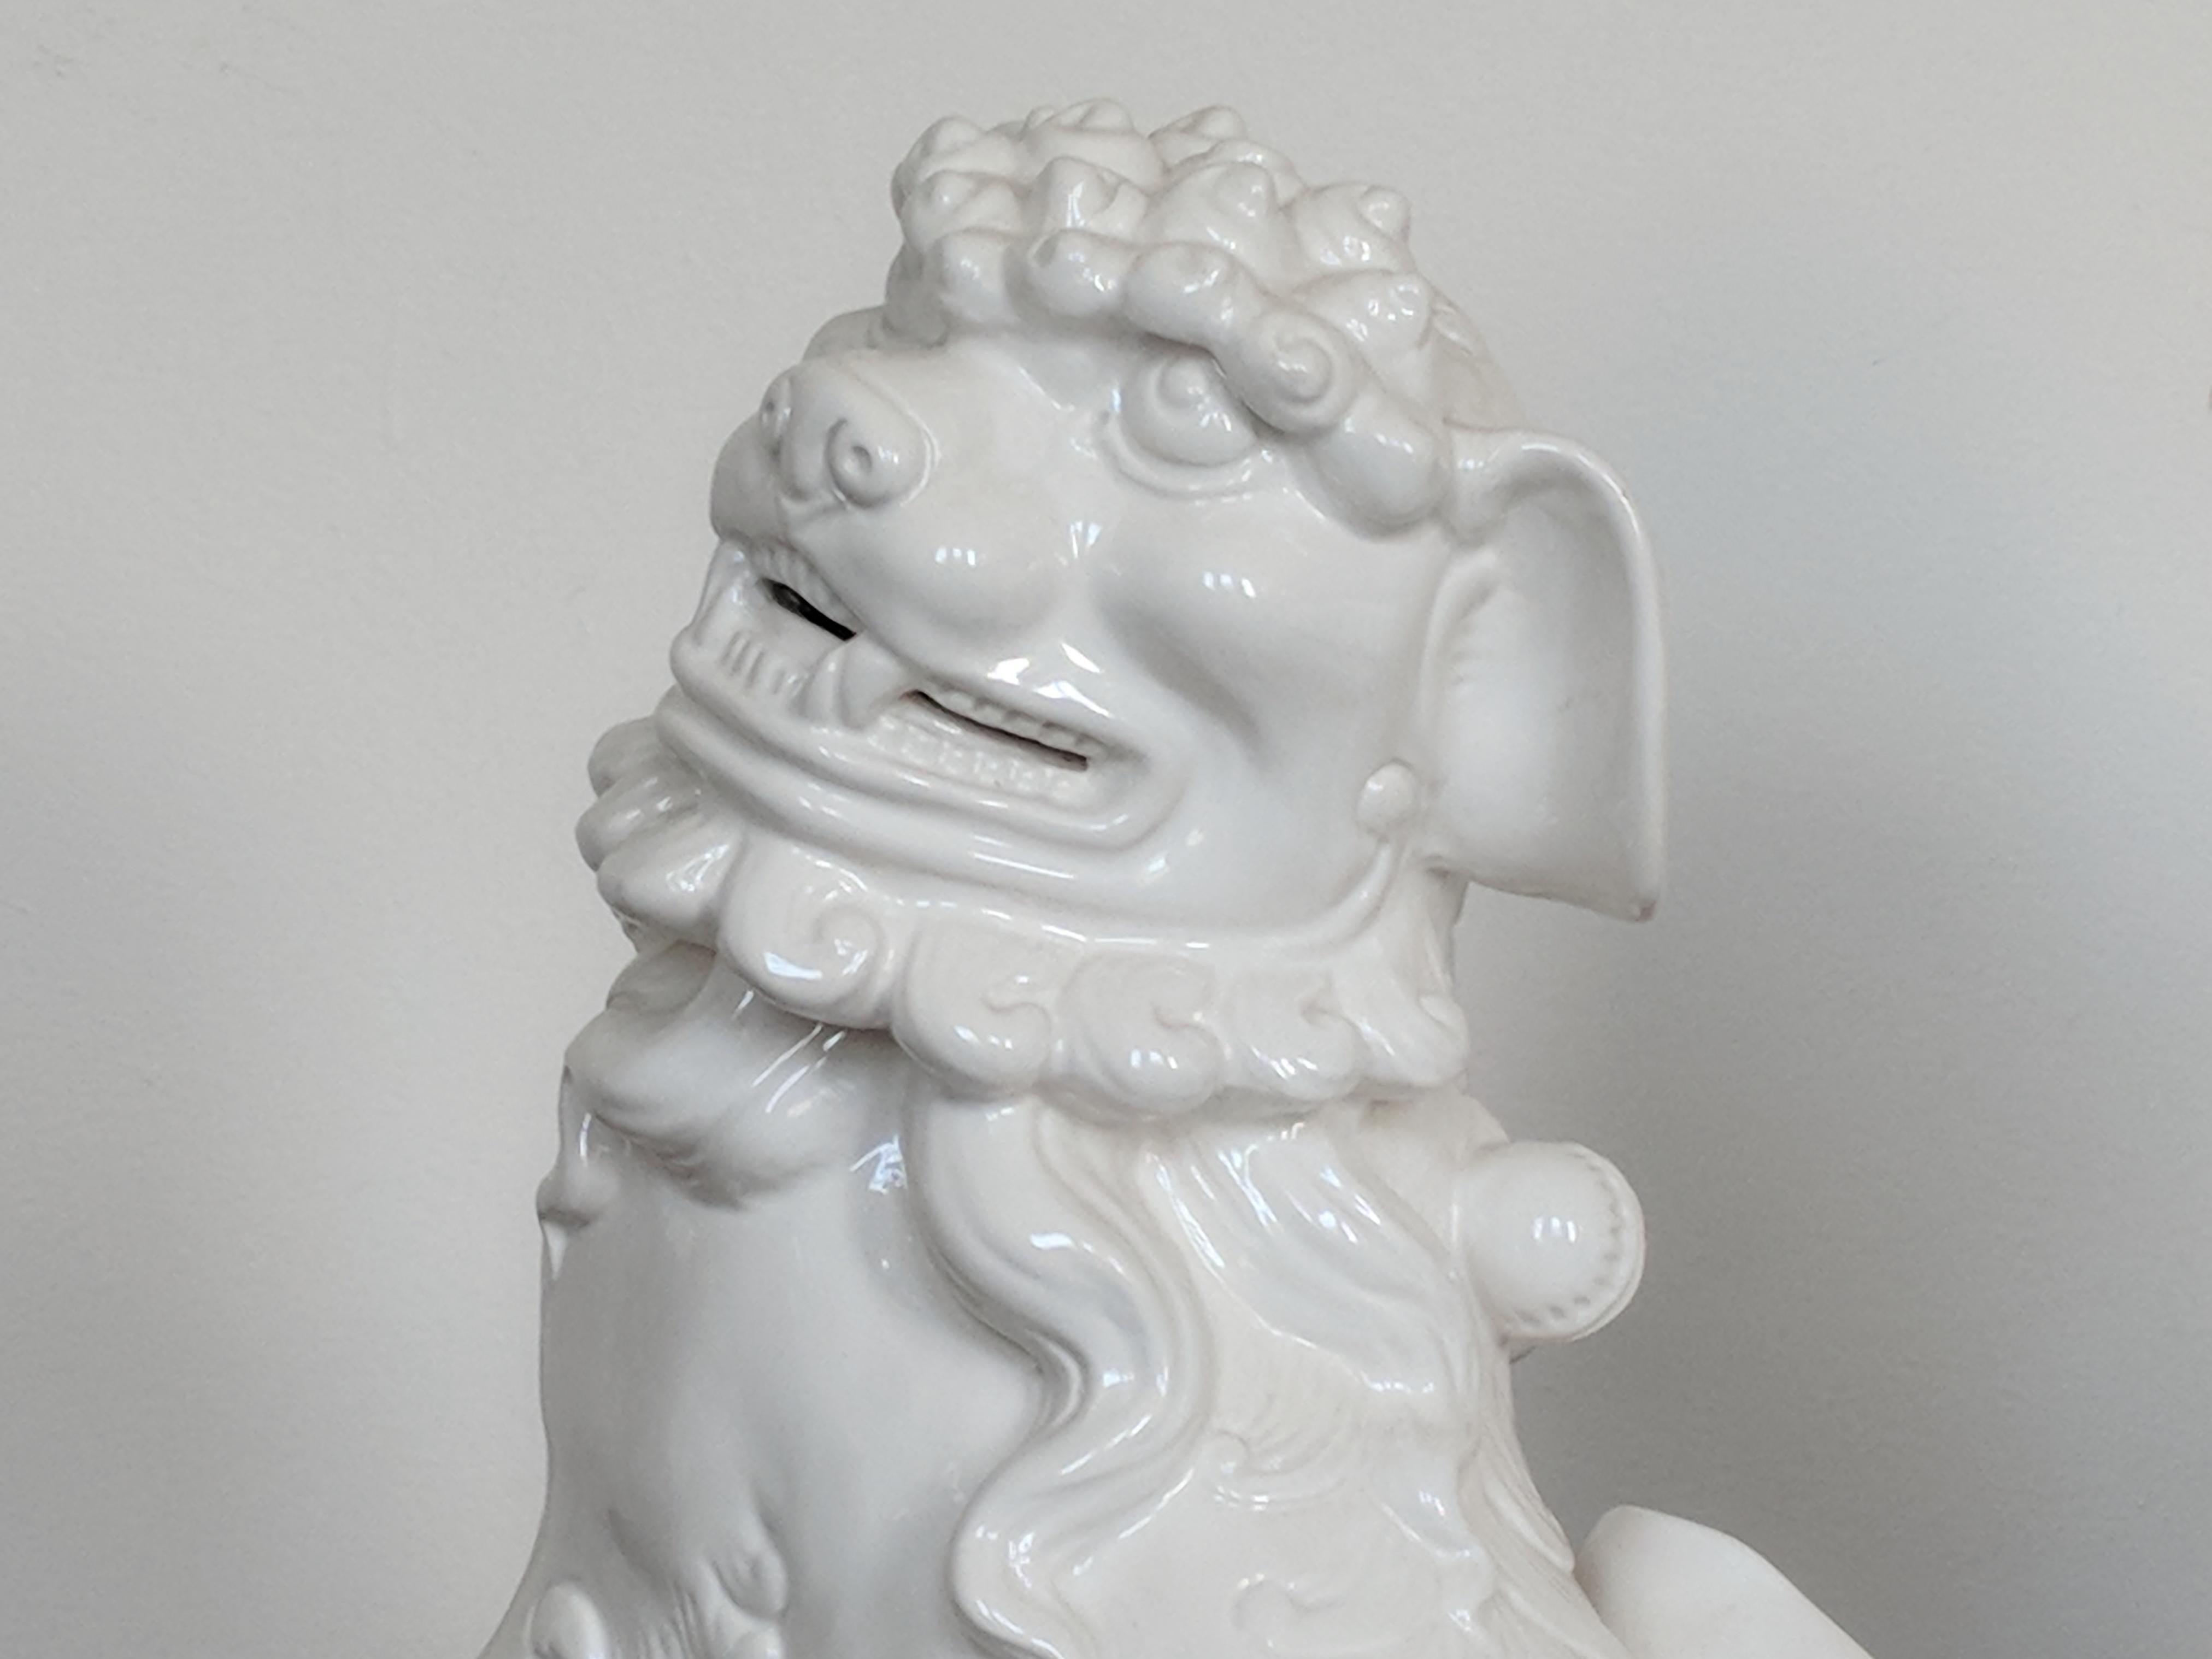 Pair of Italian White Ceramic Foo Dogs - Sculpture by Unknown